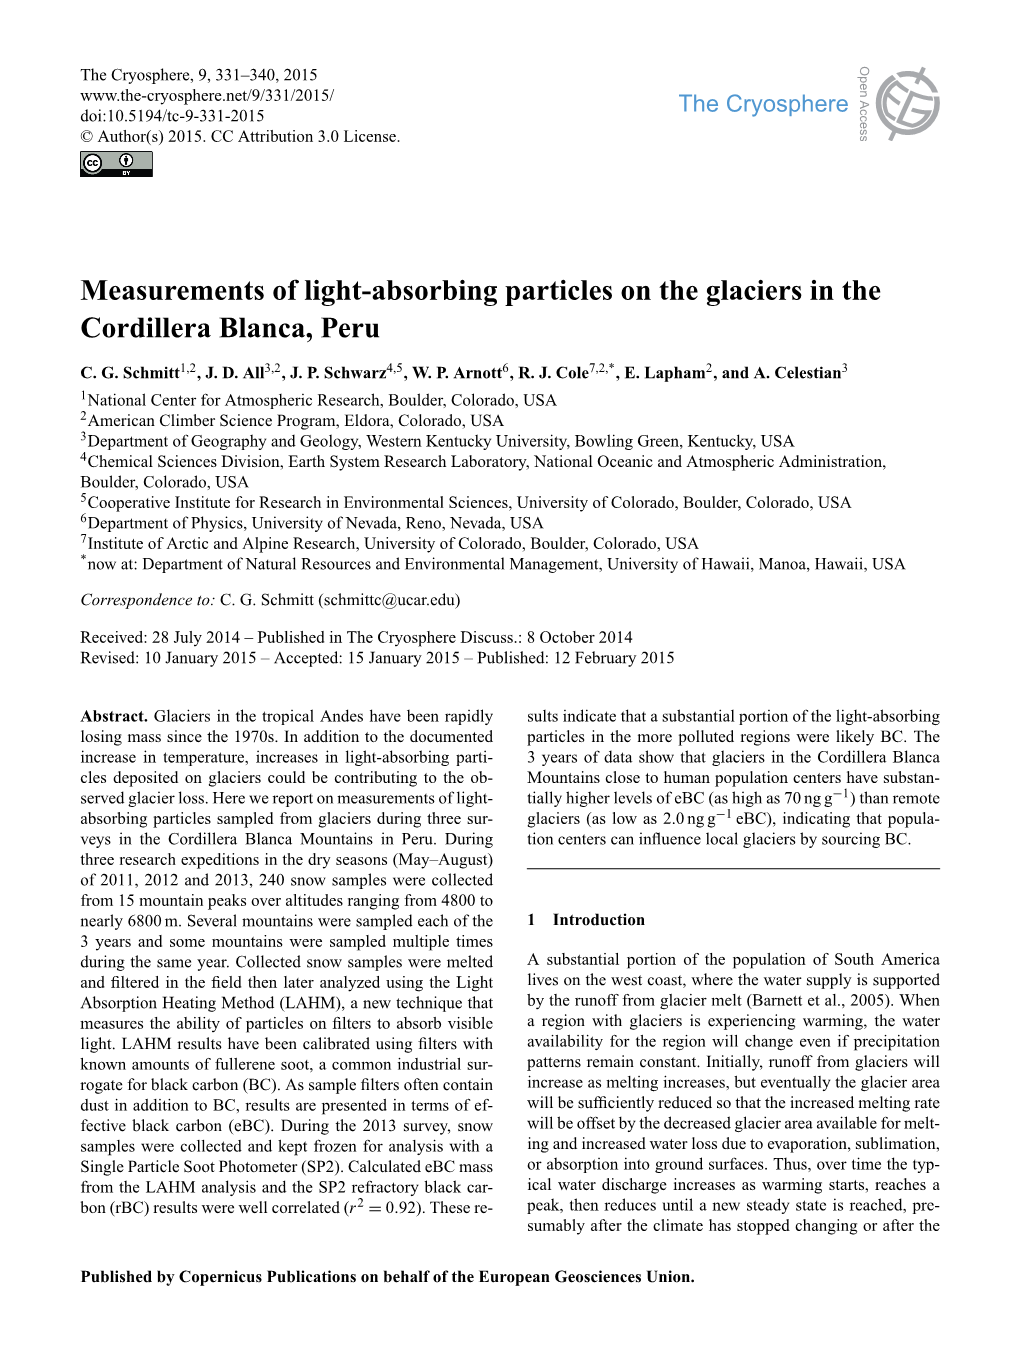 Measurements of Light-Absorbing Particles on the Glaciers in the Cordillera Blanca, Peru